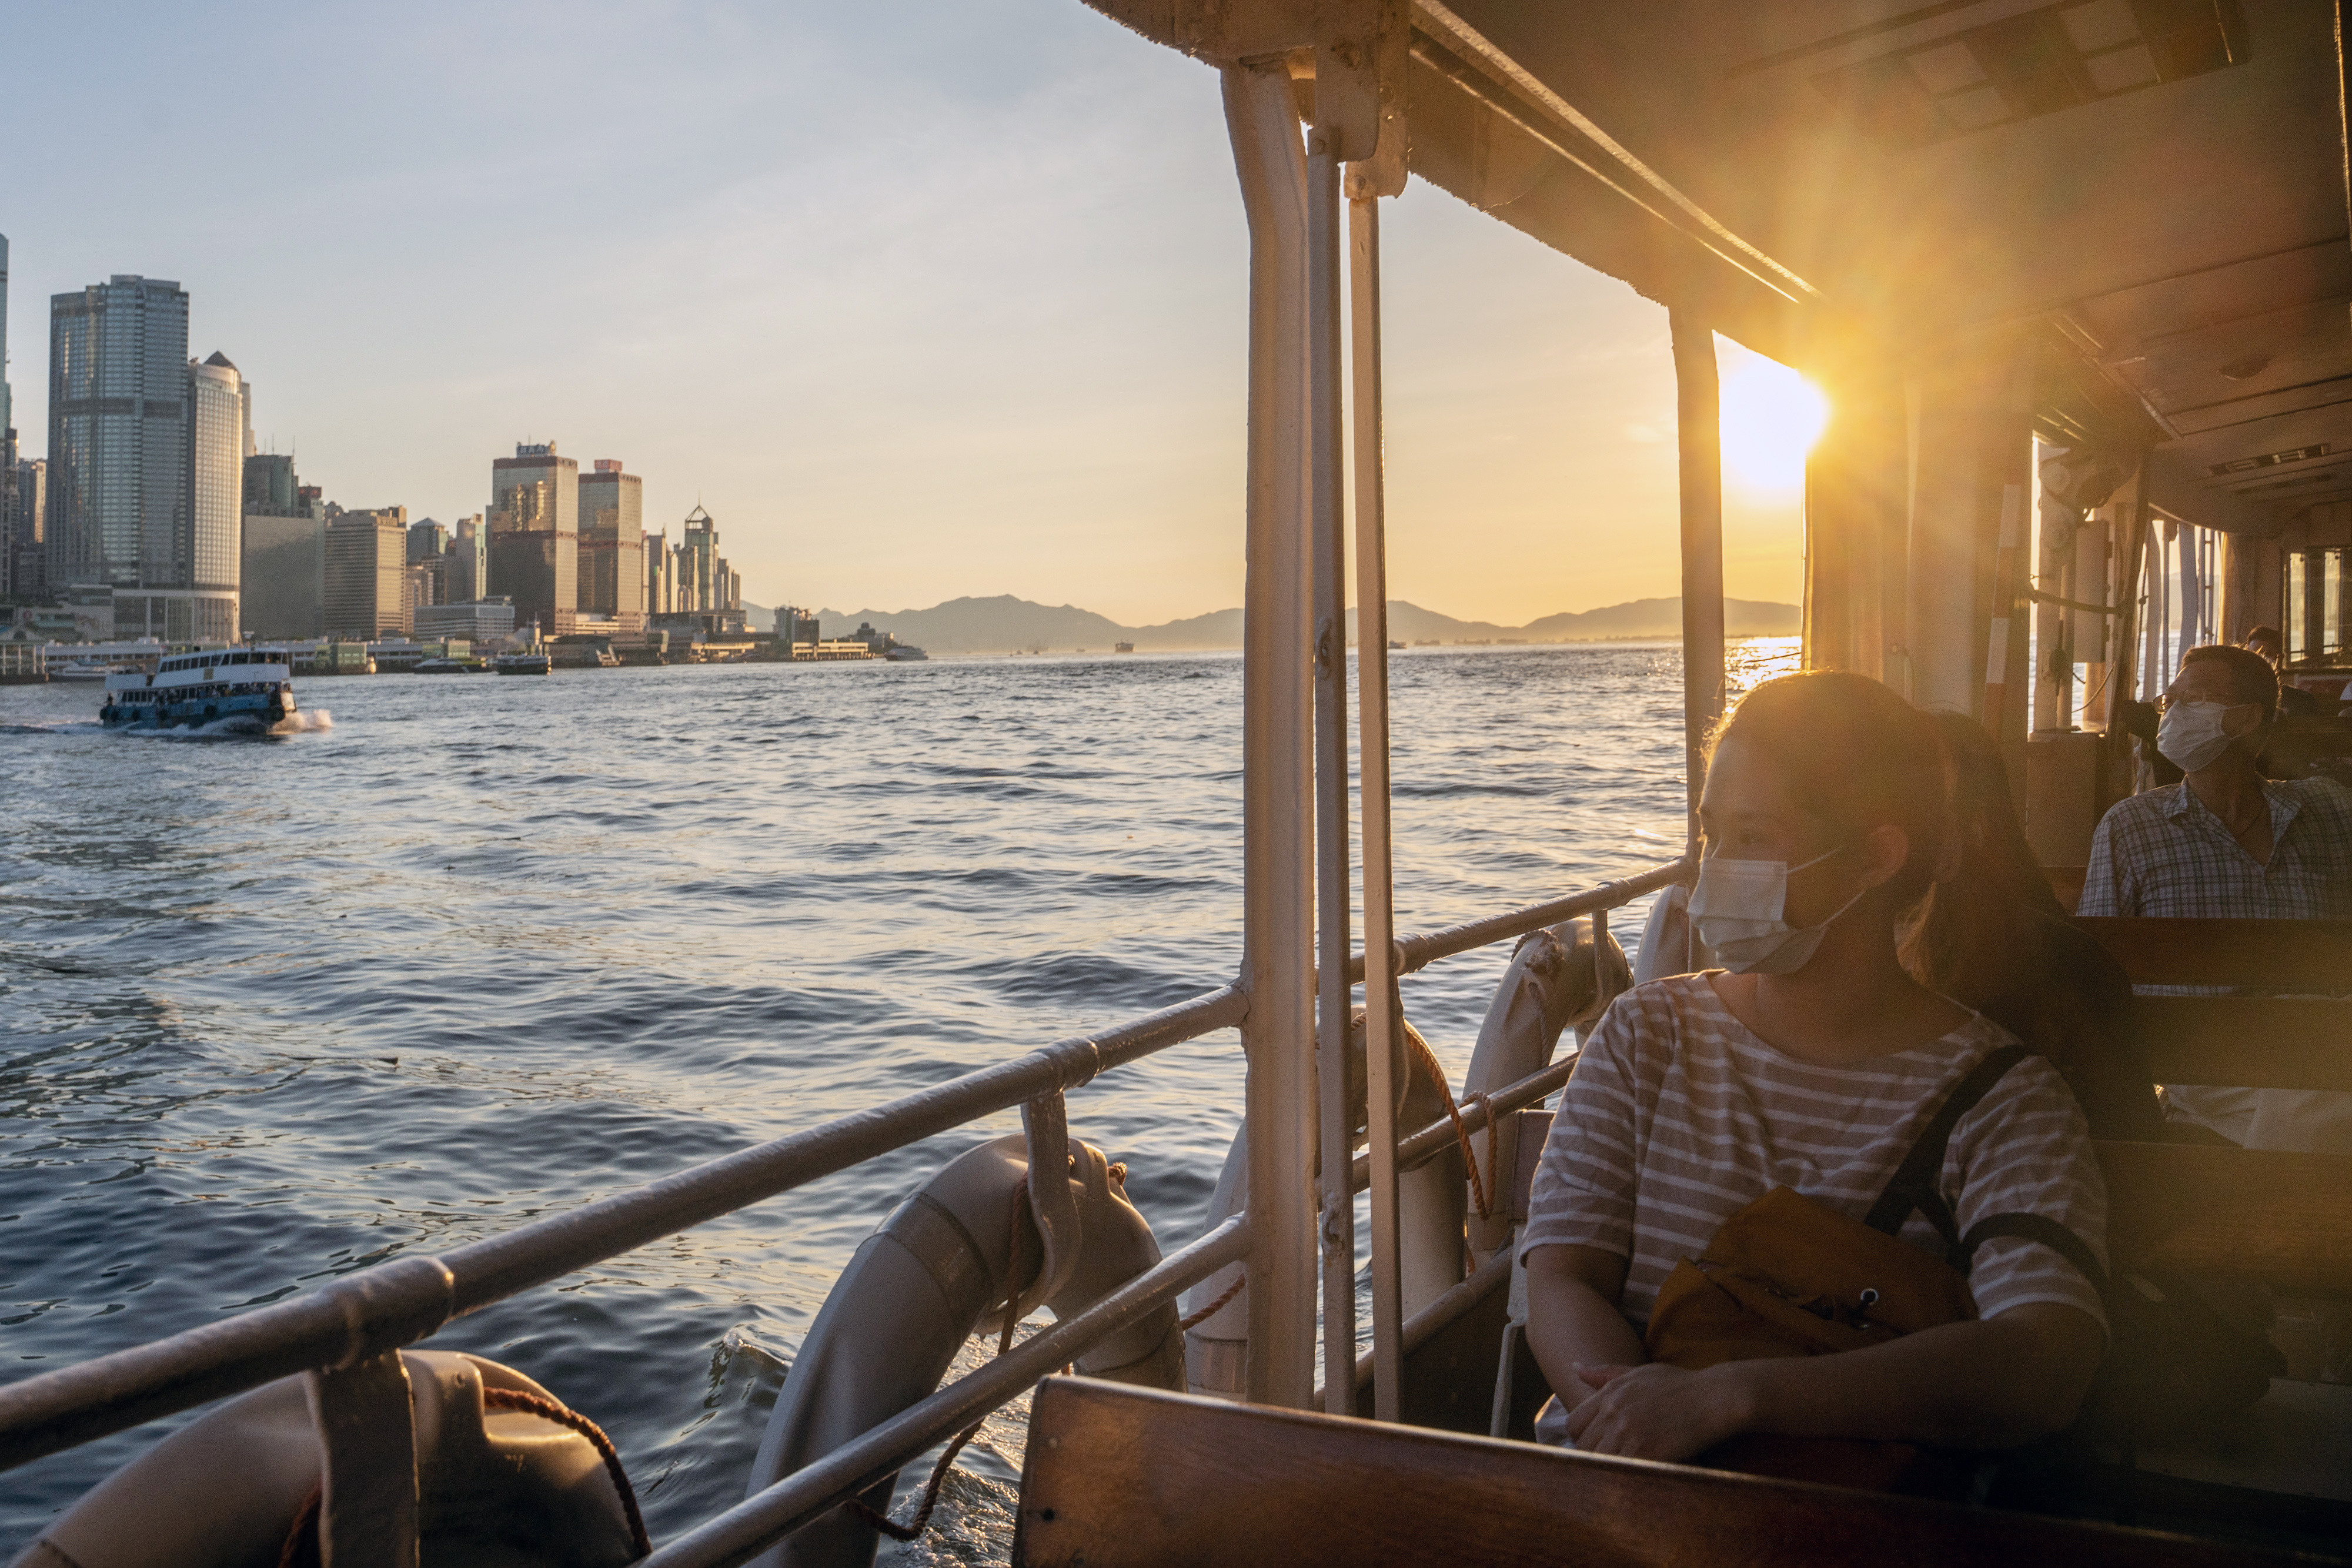 Passengers take the Star Ferry across Victoria Harbour on June 28. Hong Kong’s new elites are well positioned to repeat the city’s past success. Photo: Bloomberg